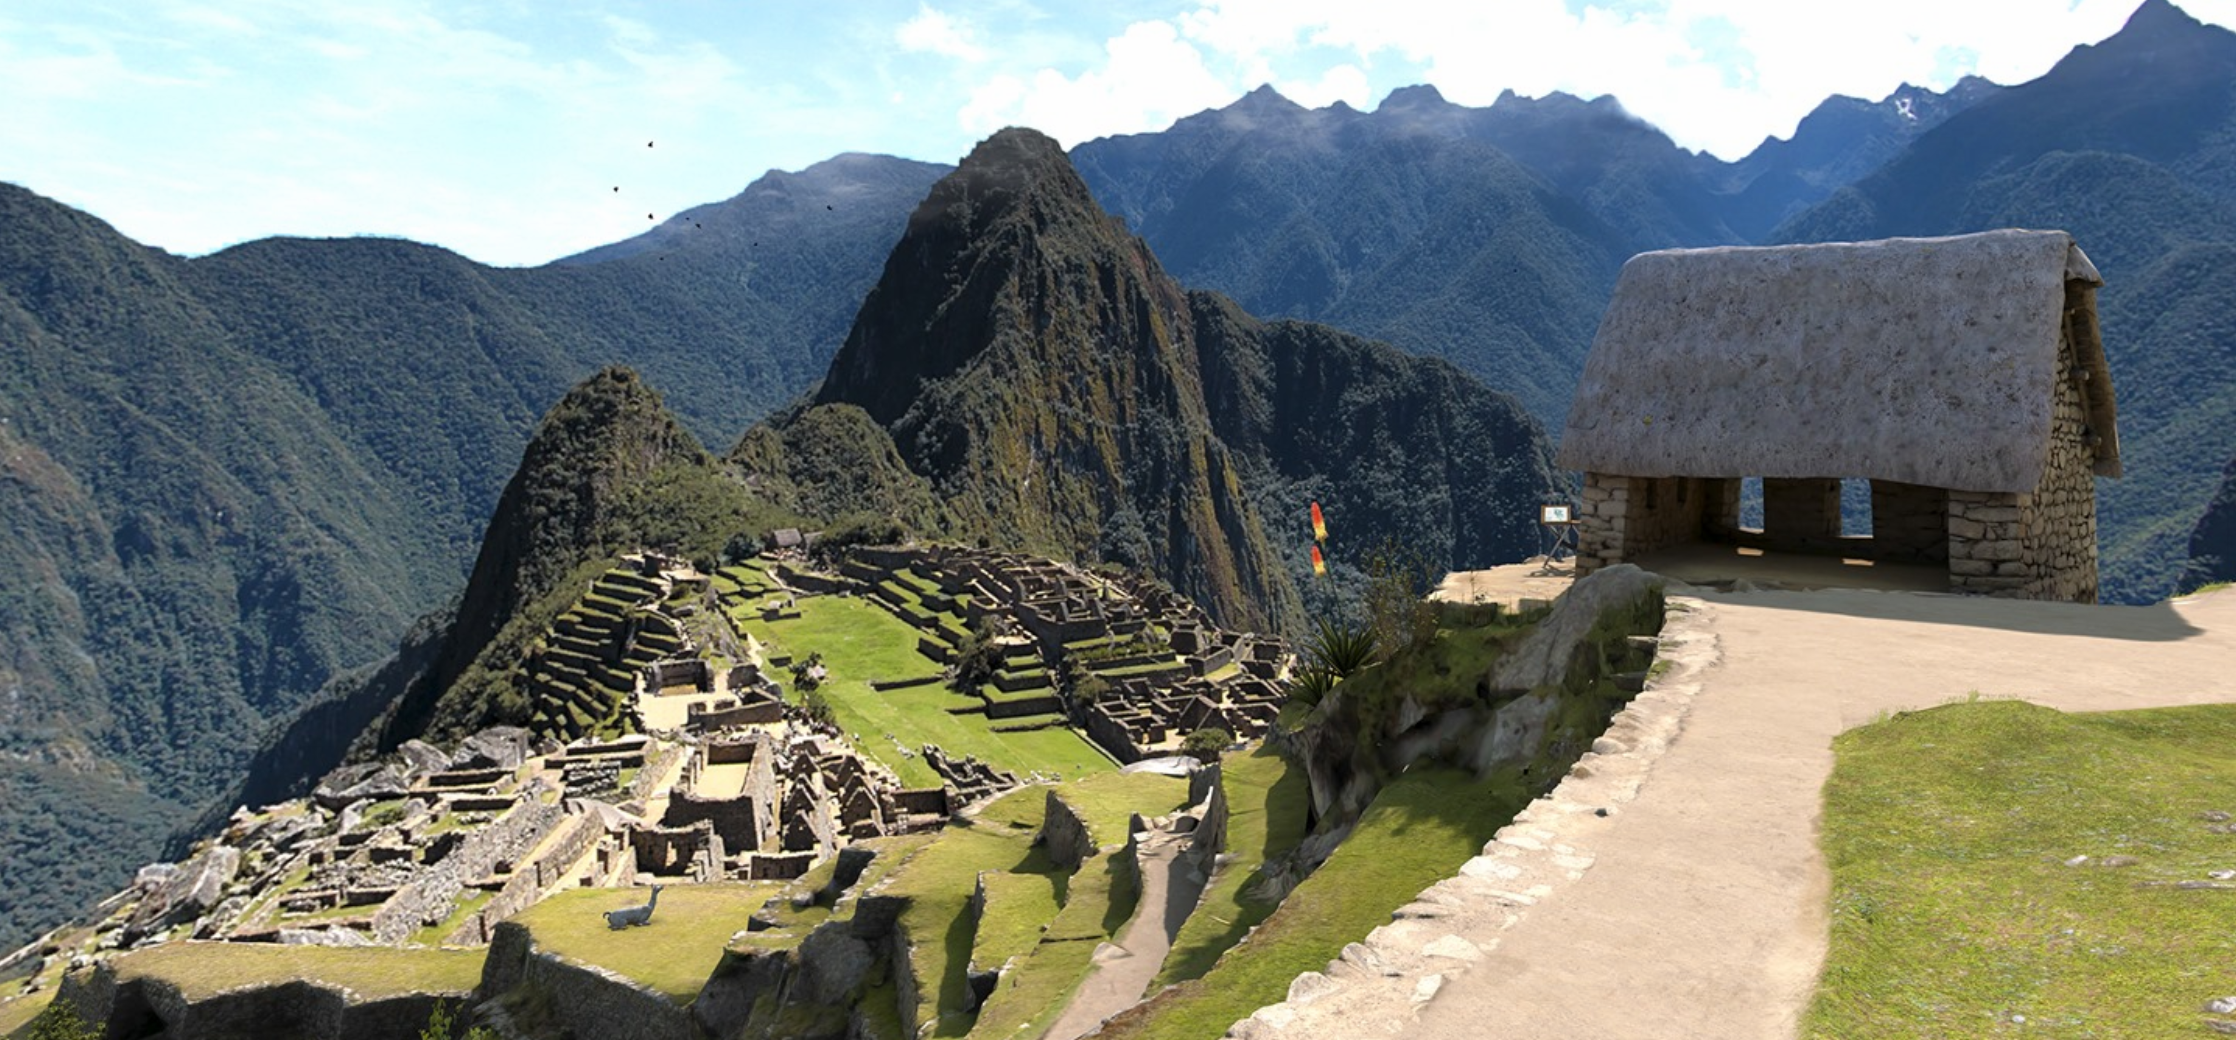 photo of Image taken from National Geographic Explore VR Level 2, Machu Picchu.